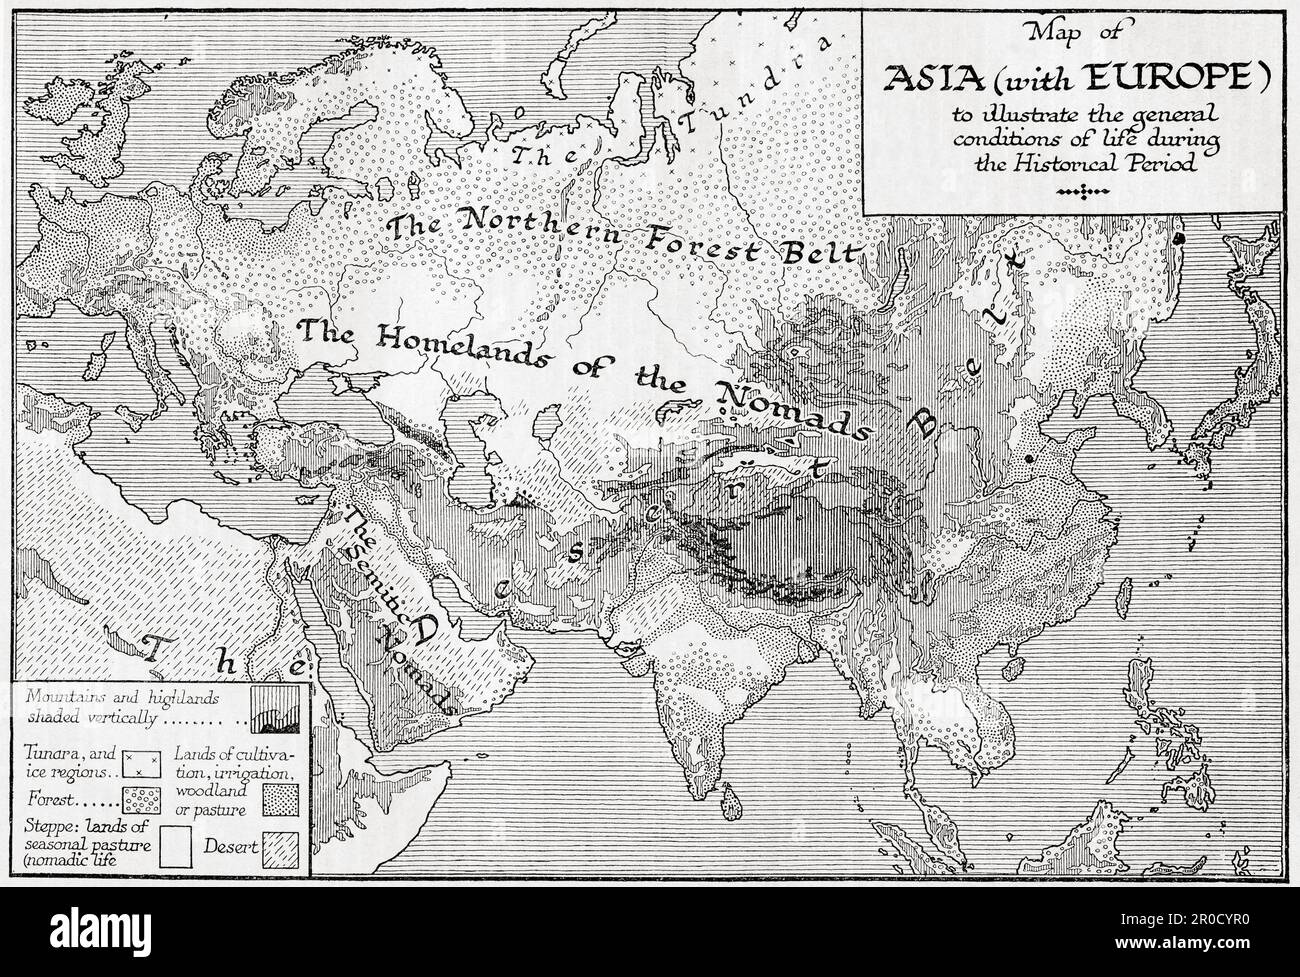 Map of Asia with Europe to illustrate the general conditions of life during the historical period.  From the book Outline of History by H.G. Wells, published 1920. Stock Photo